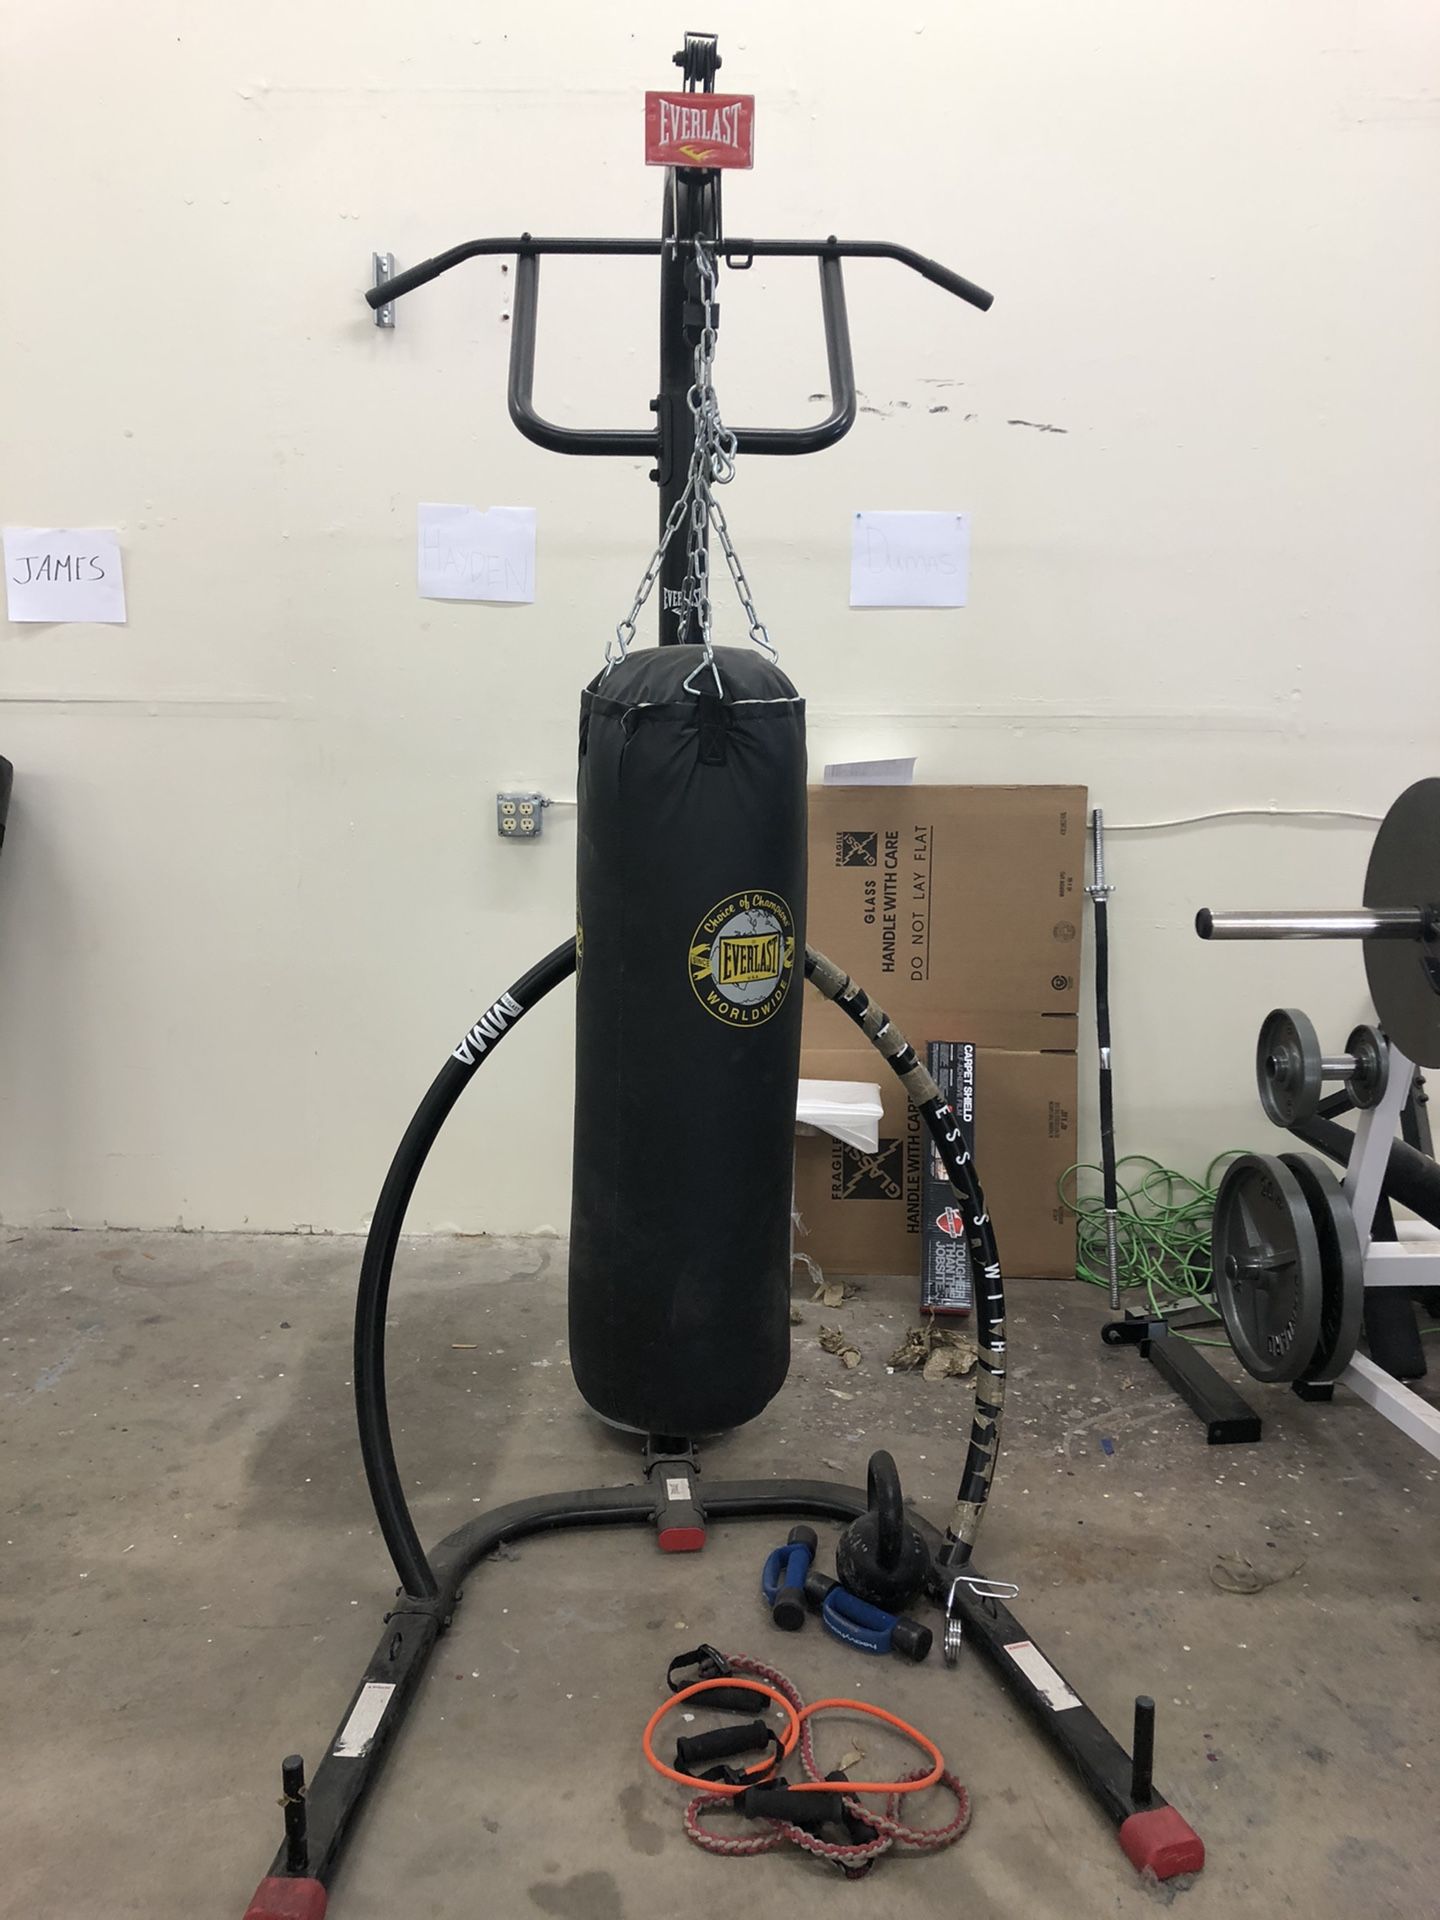 Everlast Punching Bag and stand